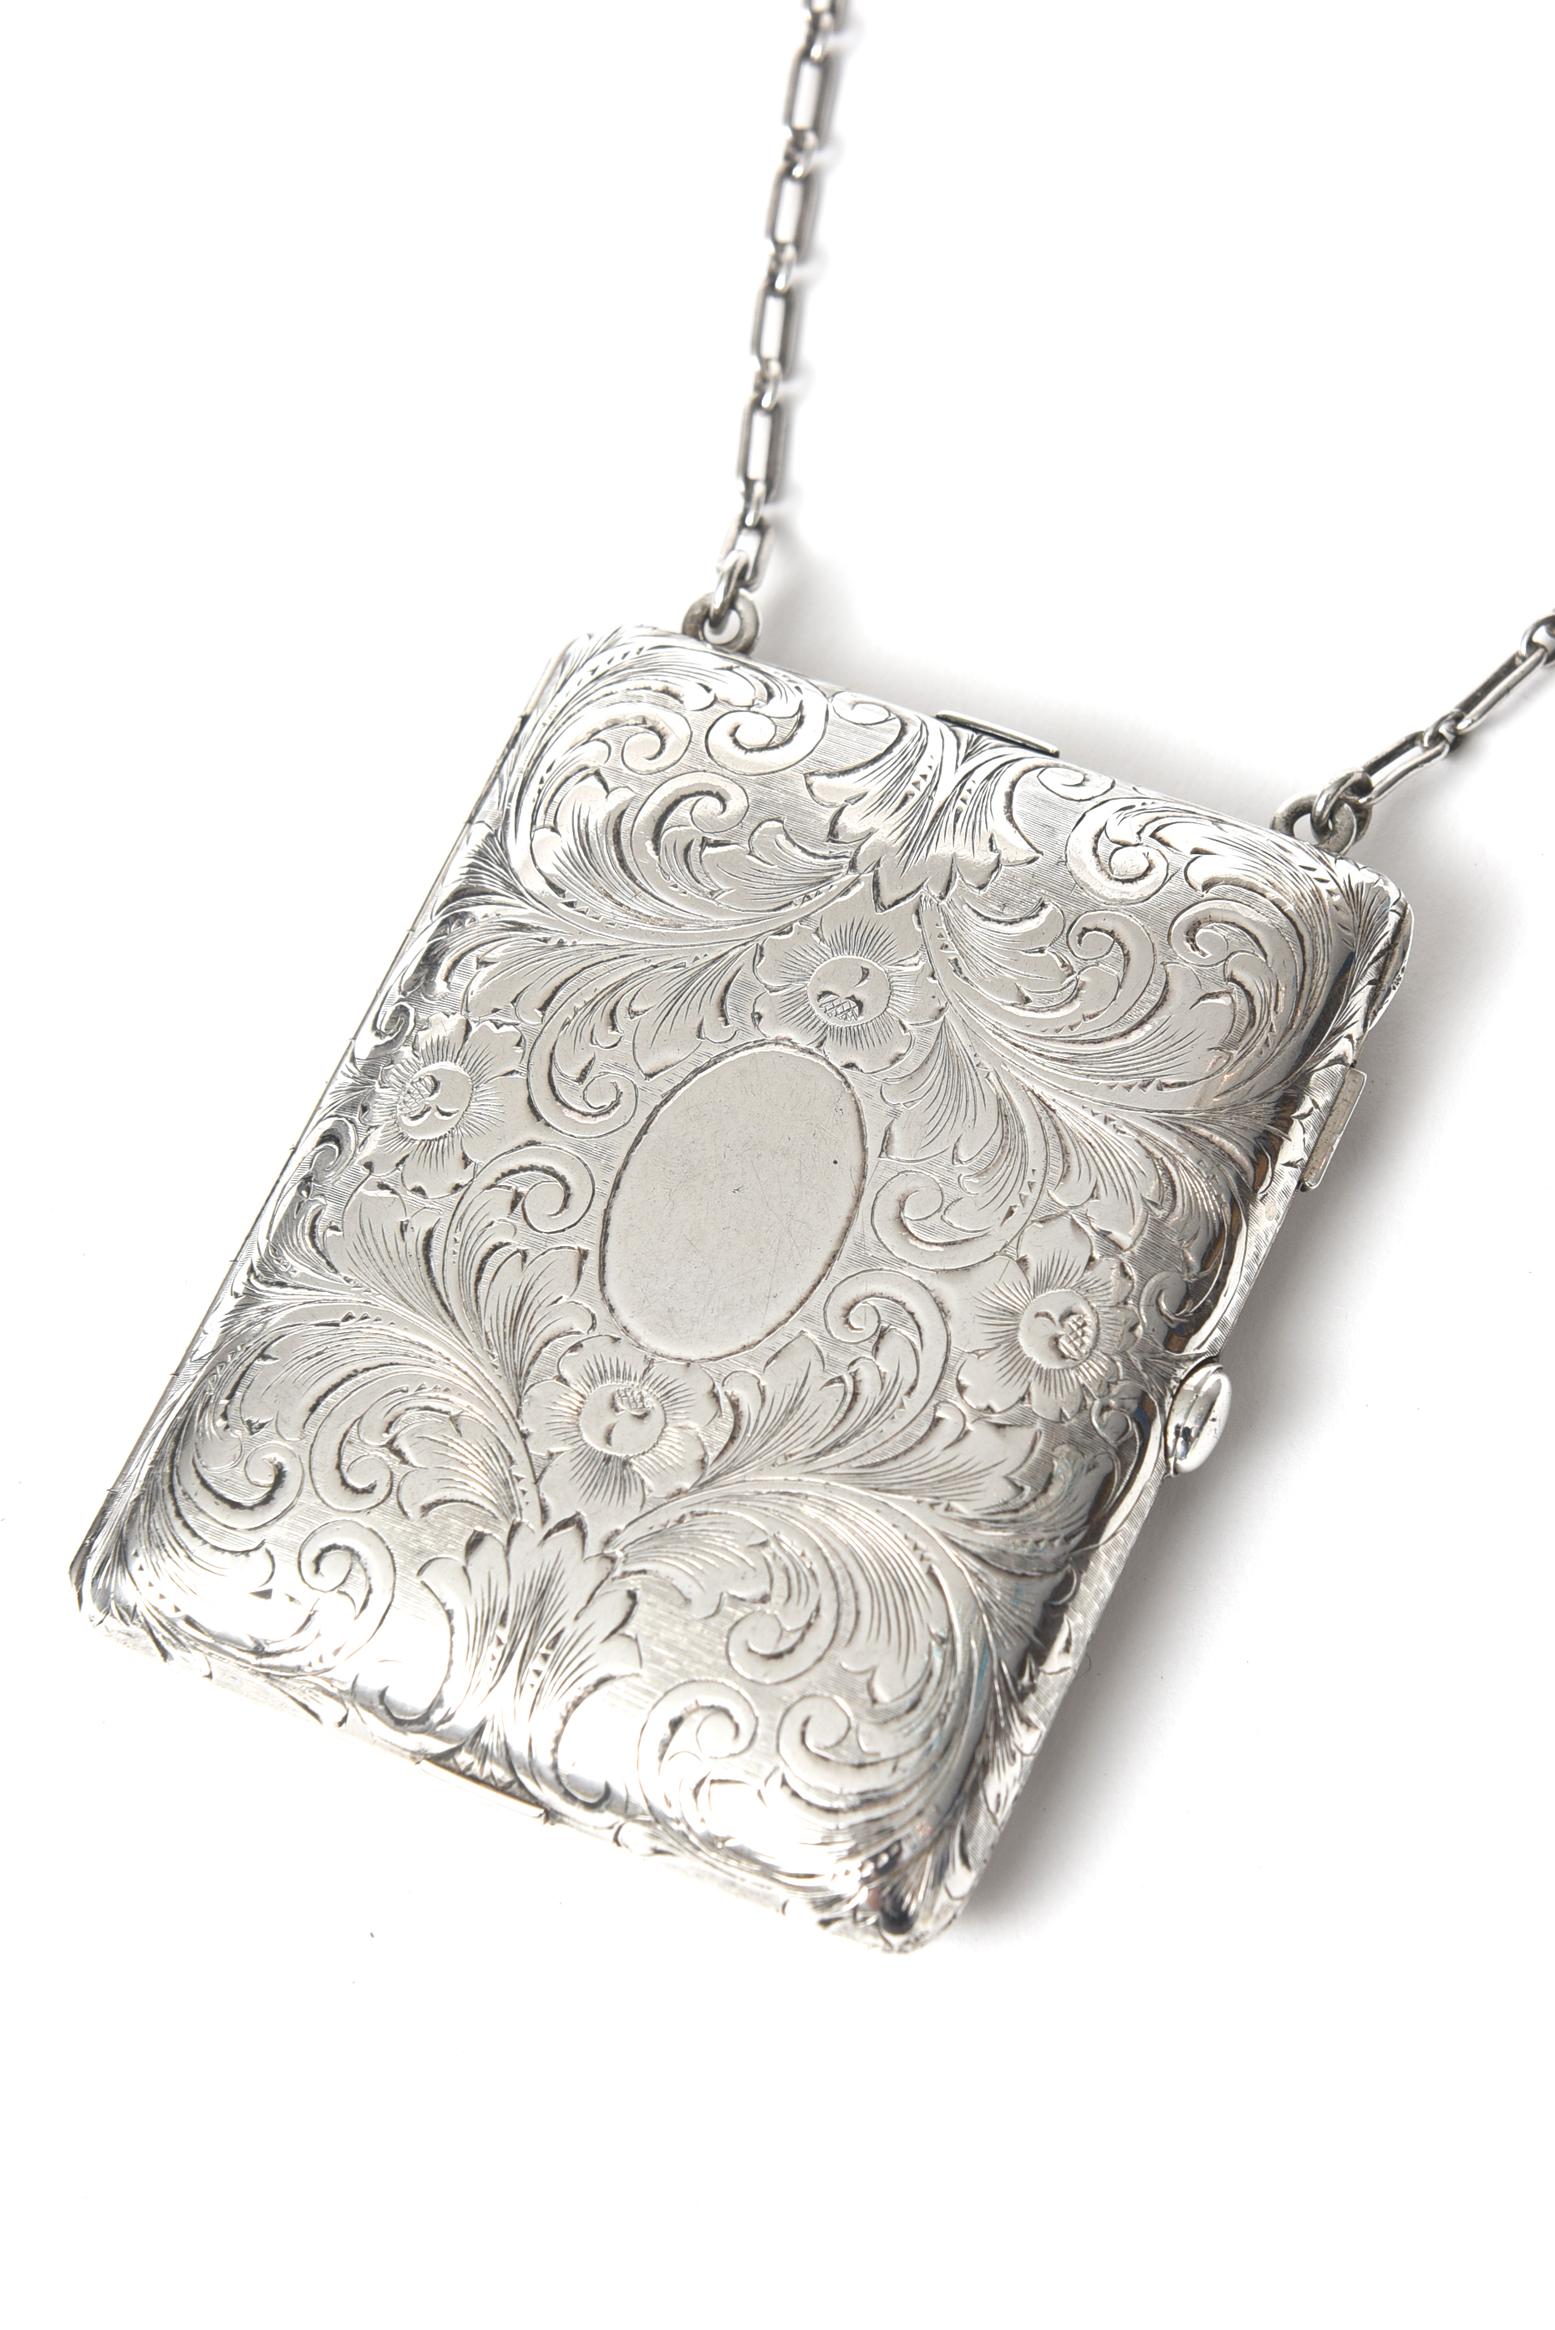 Early 20th century Tiffany & Co. sterling silver compact purse. This piece has a mechanical pencil, an area for cards, a mirror and a section for powder and rouge. No monogram and is new old stock; part of a collection from a jewelry store that